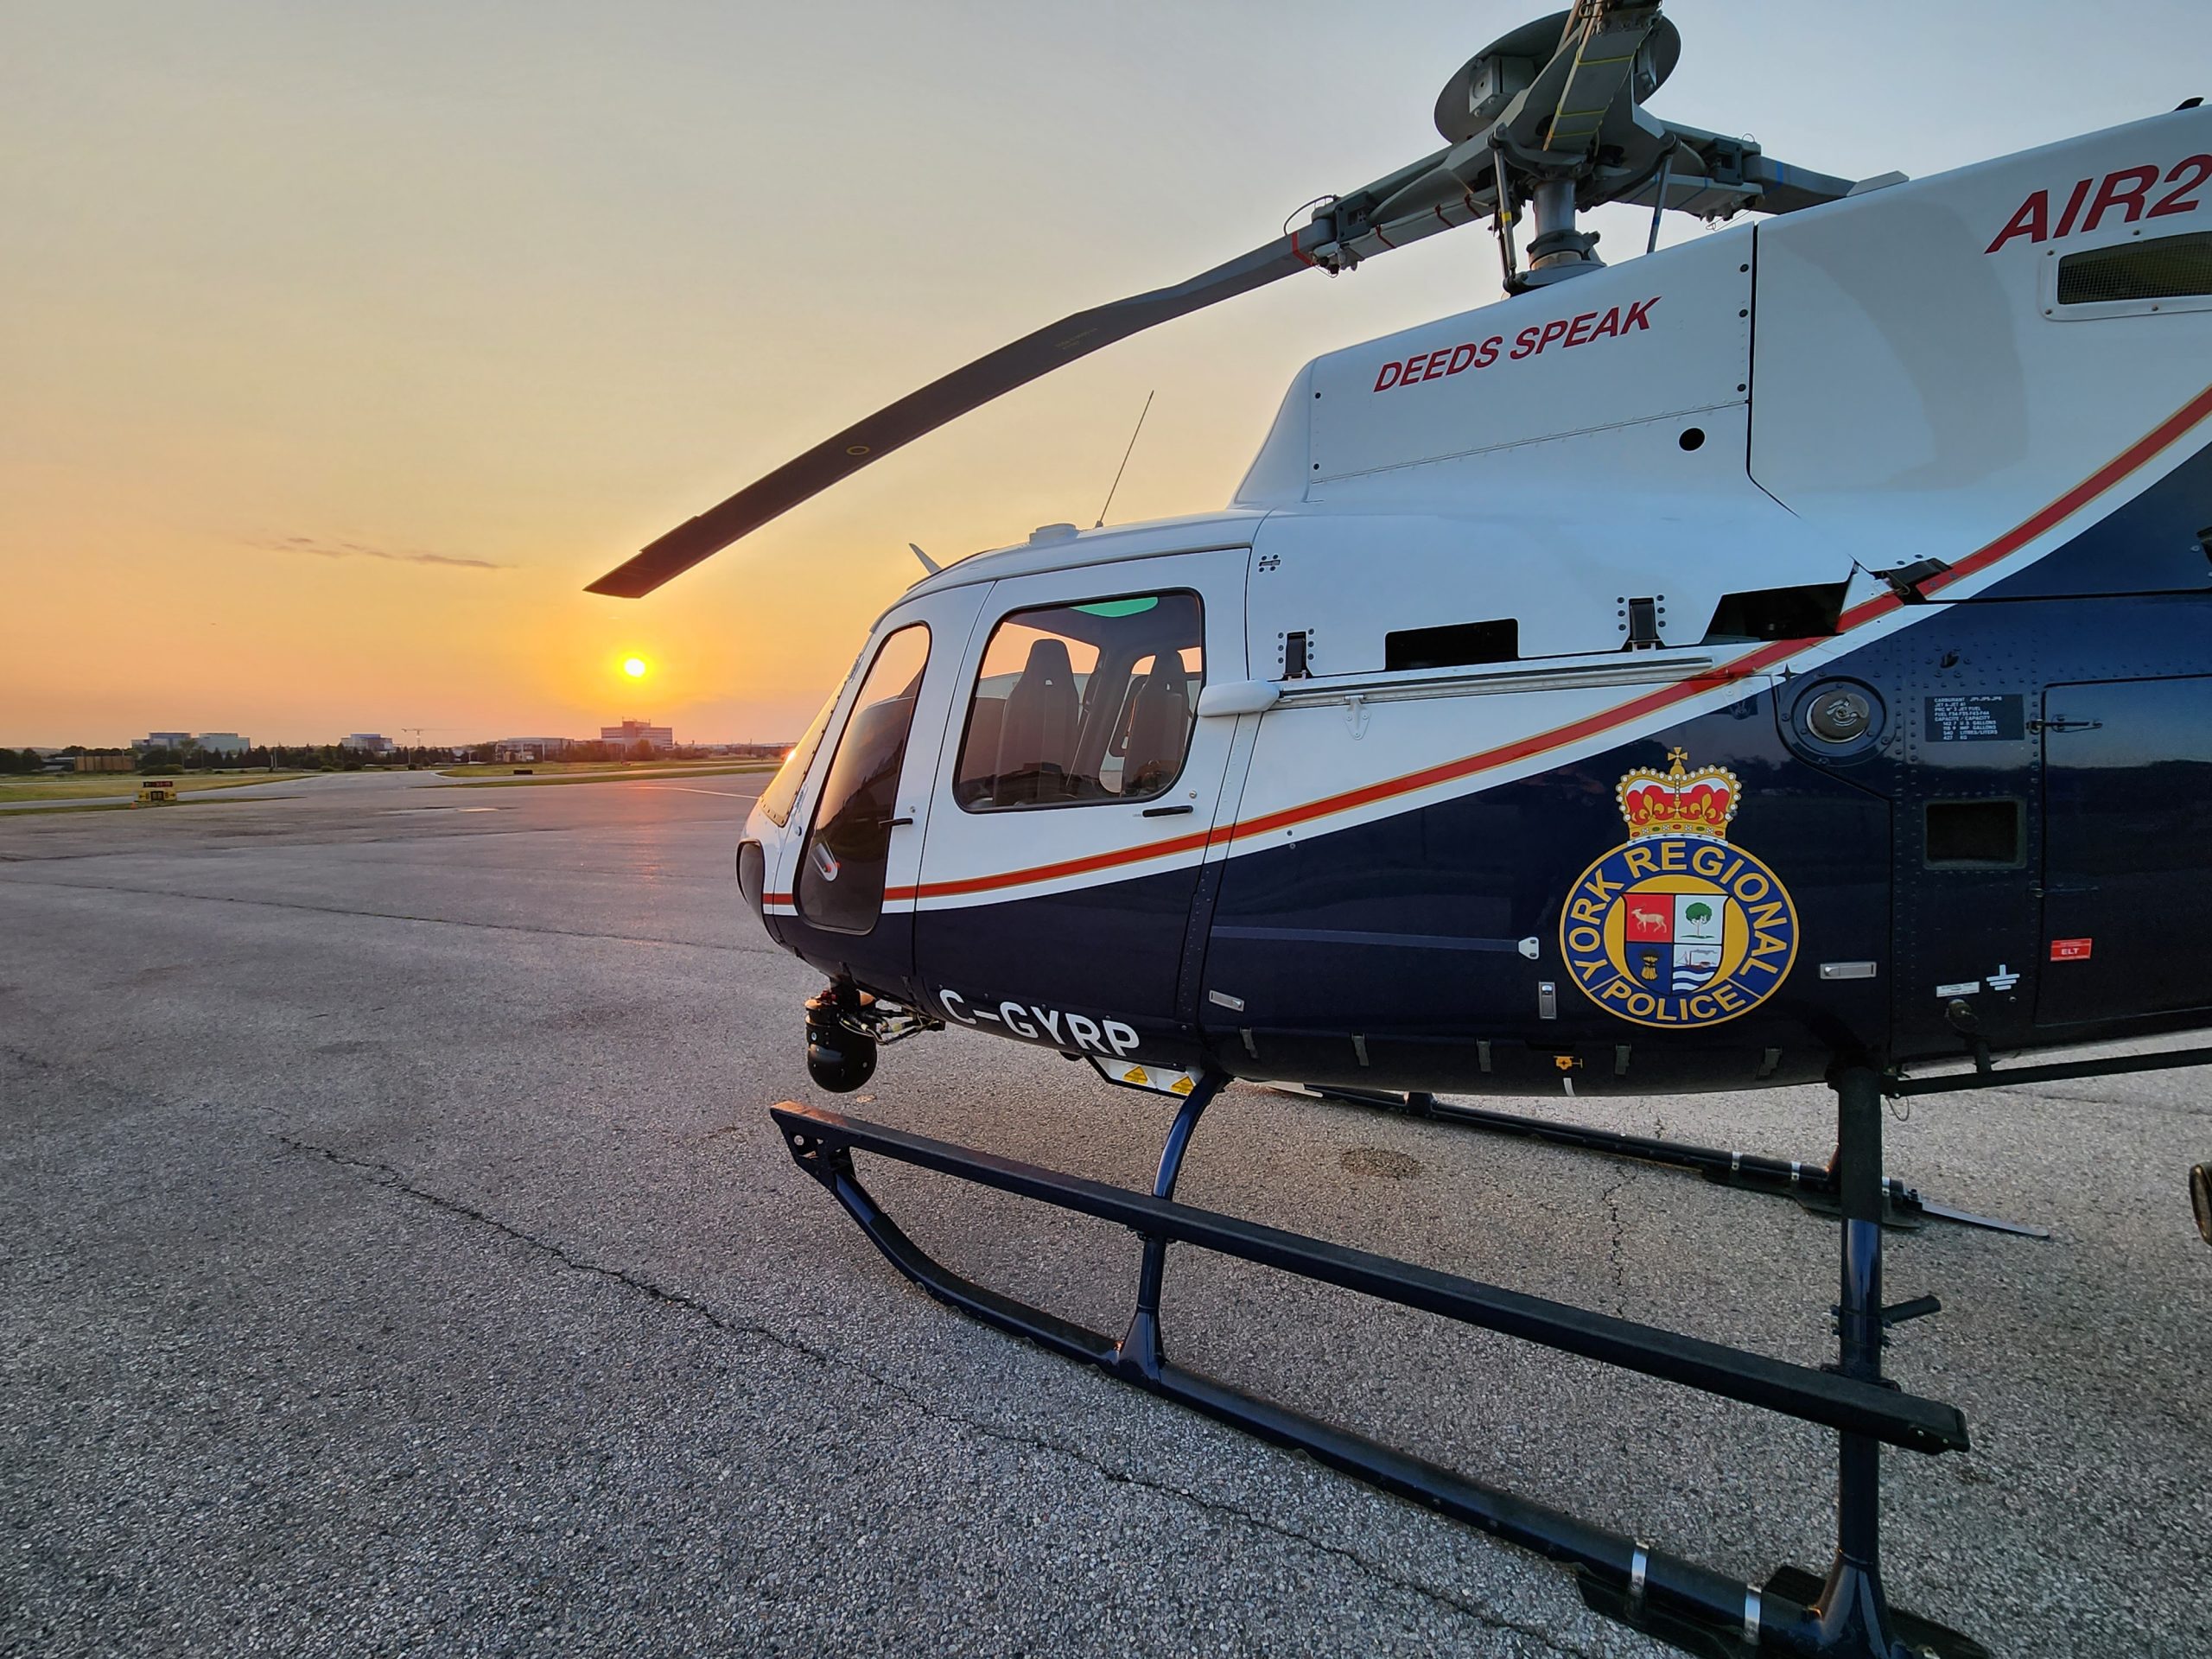 BAYSAR airborne electronic search skills shared with York Regional Police